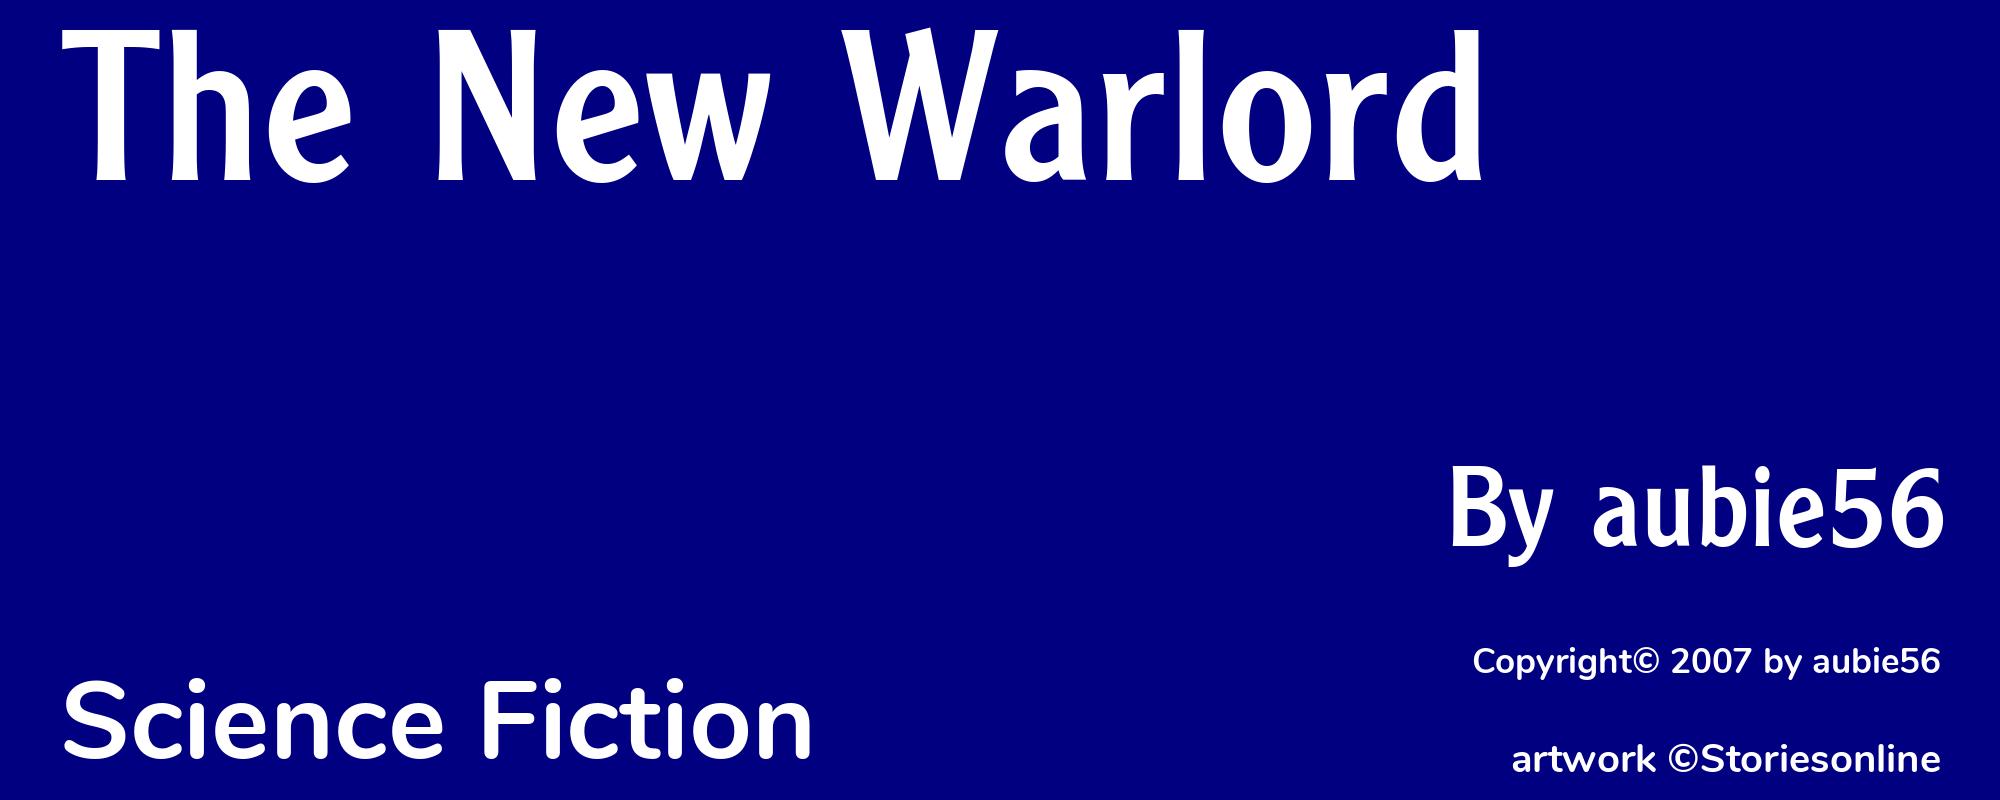 The New Warlord - Cover